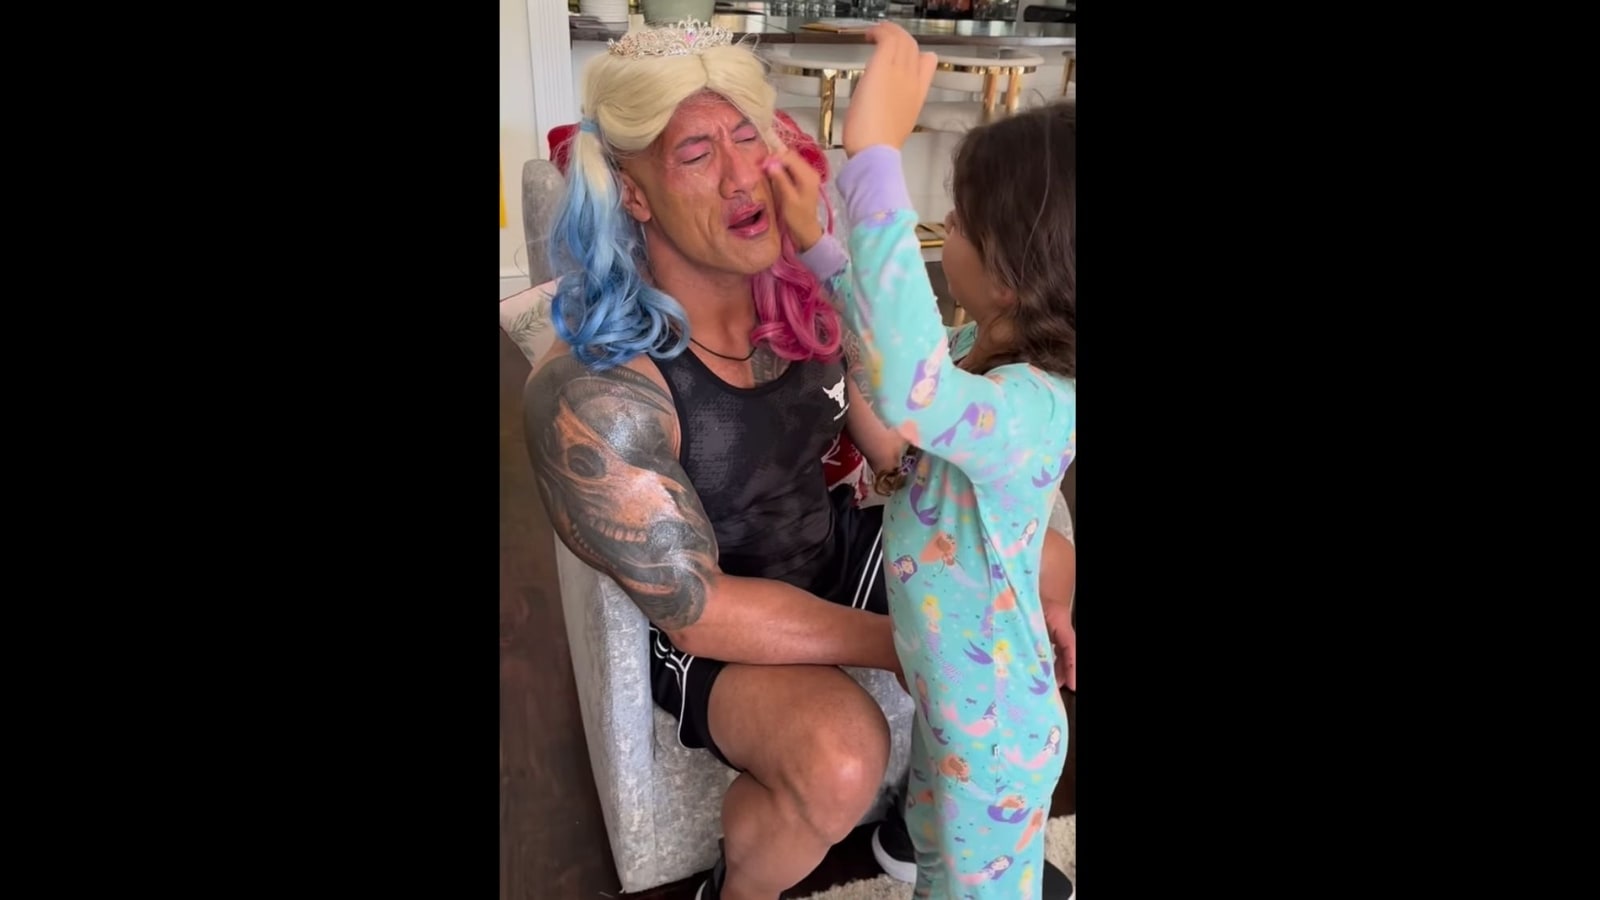 Dwayne The Rock Johnson - Update from the video I posted. Look at this lil'  boy, Hyrum's face. That's some joy real right there. Thank you to the  person who wrote this